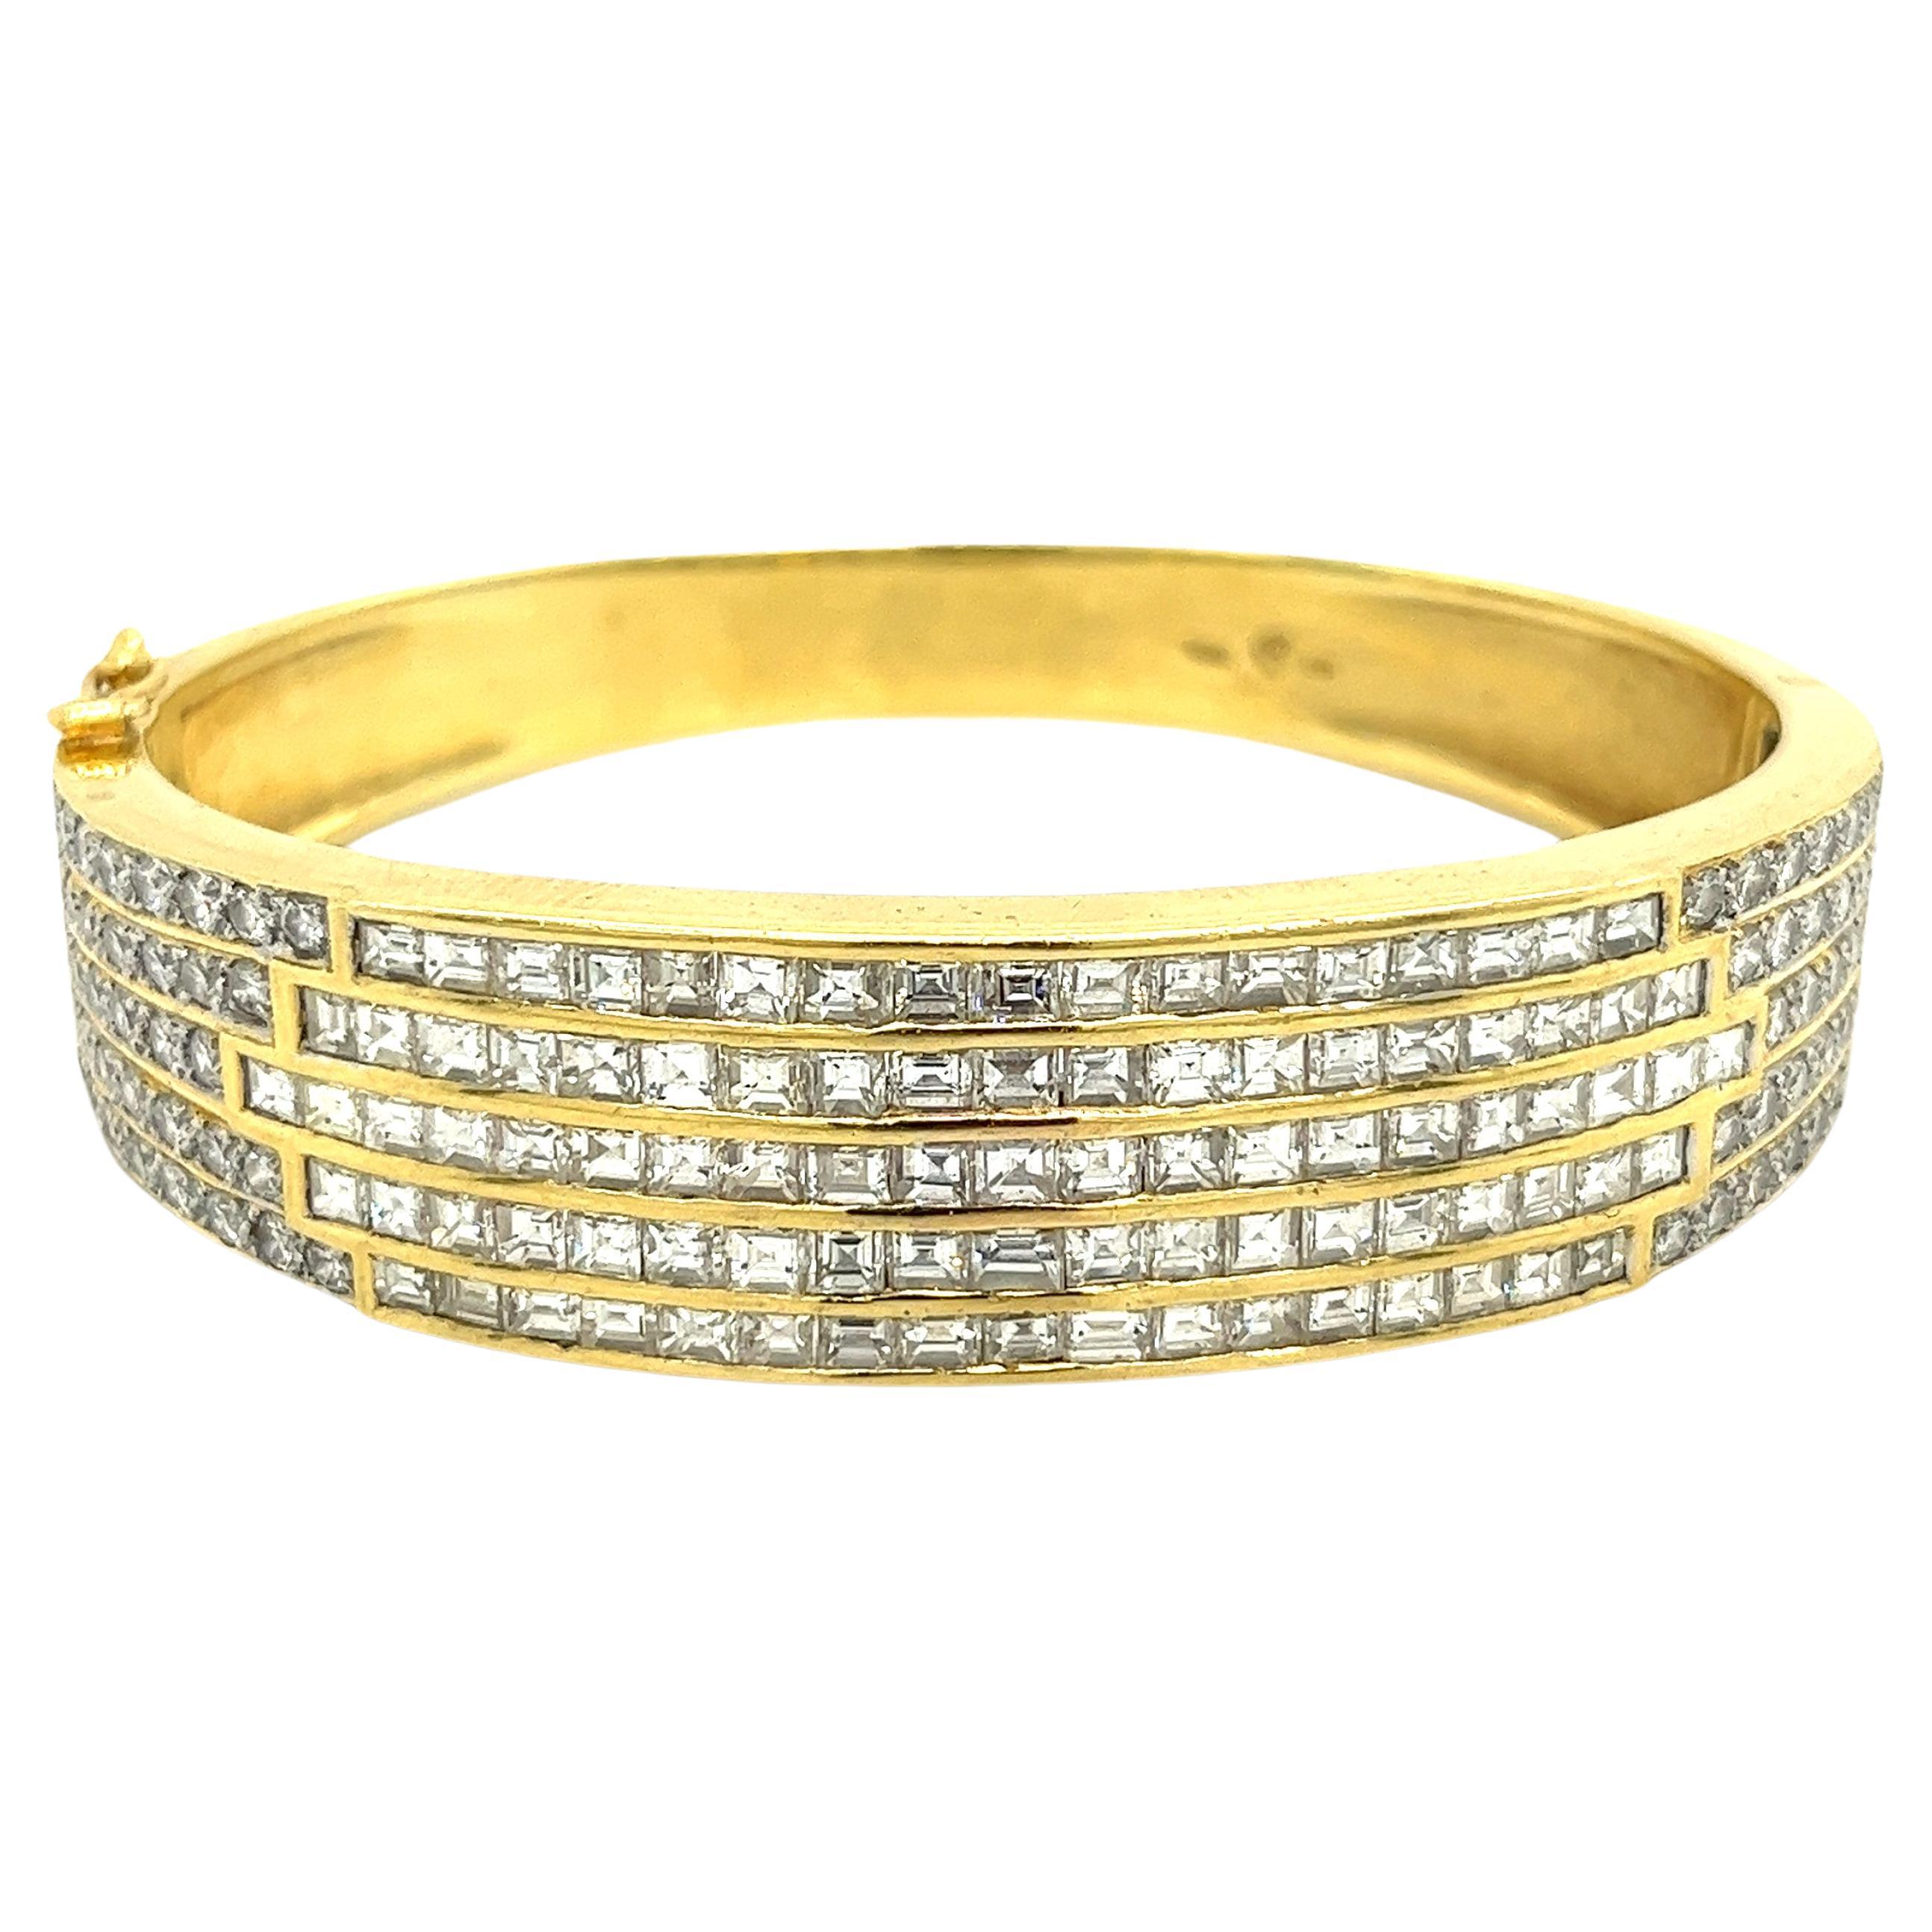 Over 10 carats in natural diamonds, channel and tension set in 18 karat solid yellow gold. Featuring 94 baguette and asscher cut diamonds, flanked by 72 round brilliant cut diamonds. This multi-row cuff bangle bracelet has 5 rows of expertly set